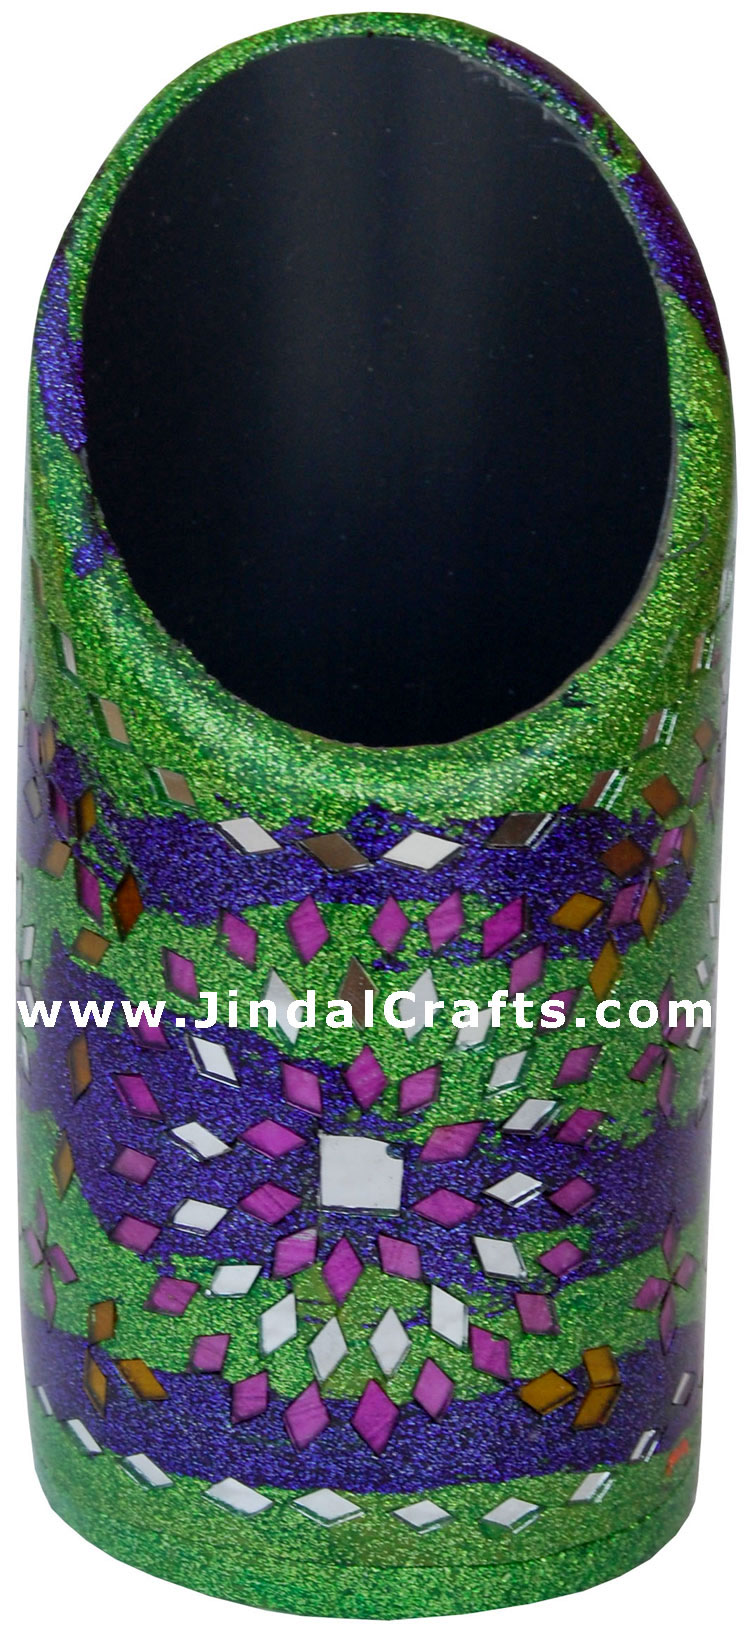 Handmade Decorative Lac Pen Stand from Indian Arts